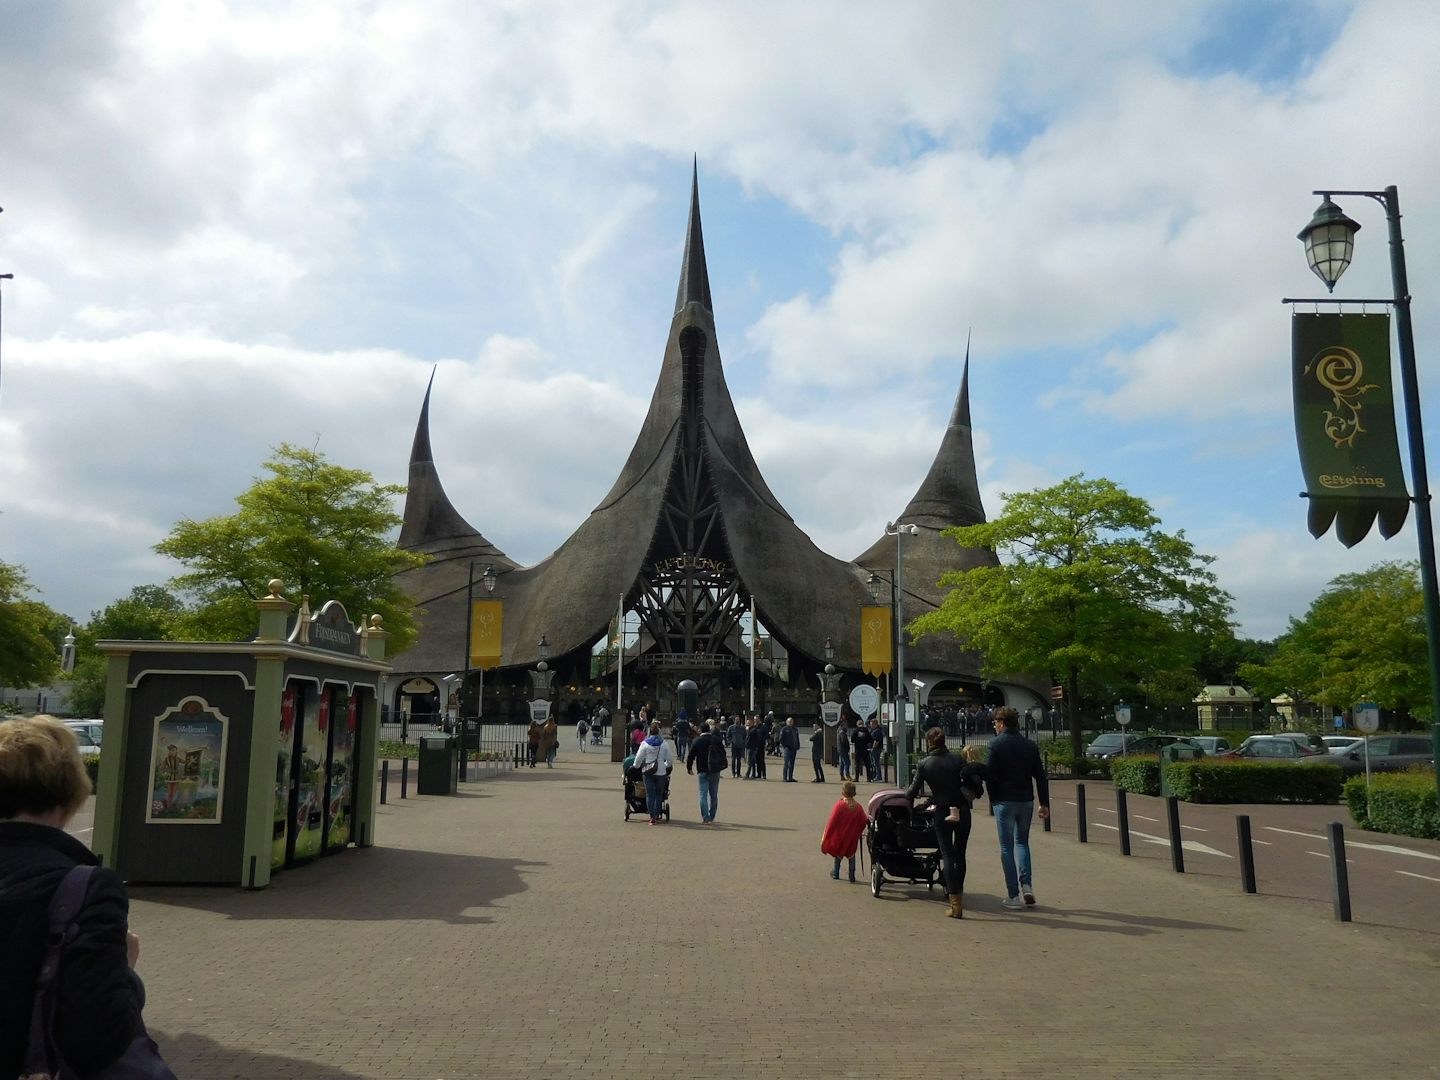 The entrance to Efteling, a beautiful theme park in the Netherlands